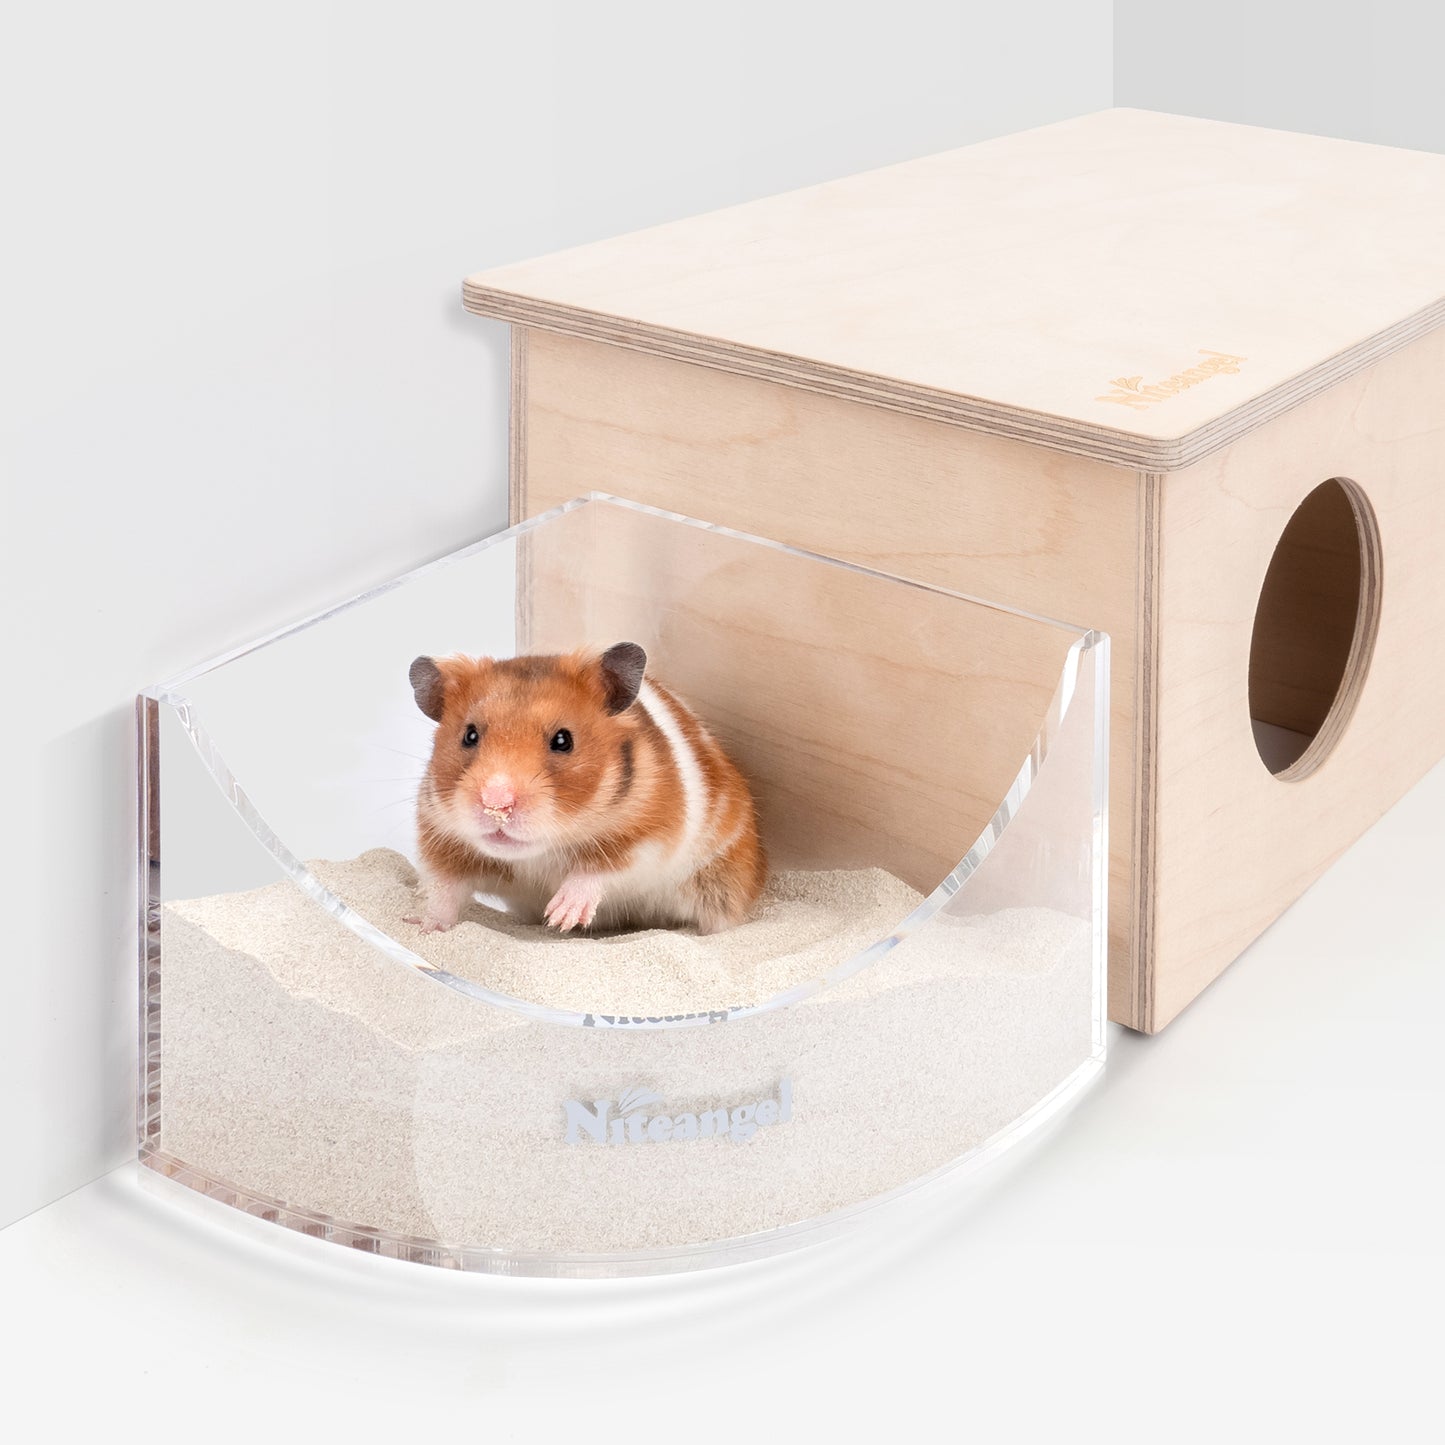 Niteangel Small Animal Sand-Bath Box - Acrylic Critter's Sand Bath Shower Room & Digging Sand Container for Hamsters Mice Lemming Gerbils or Other Small Pets (Fan-Shaped, Transparent)